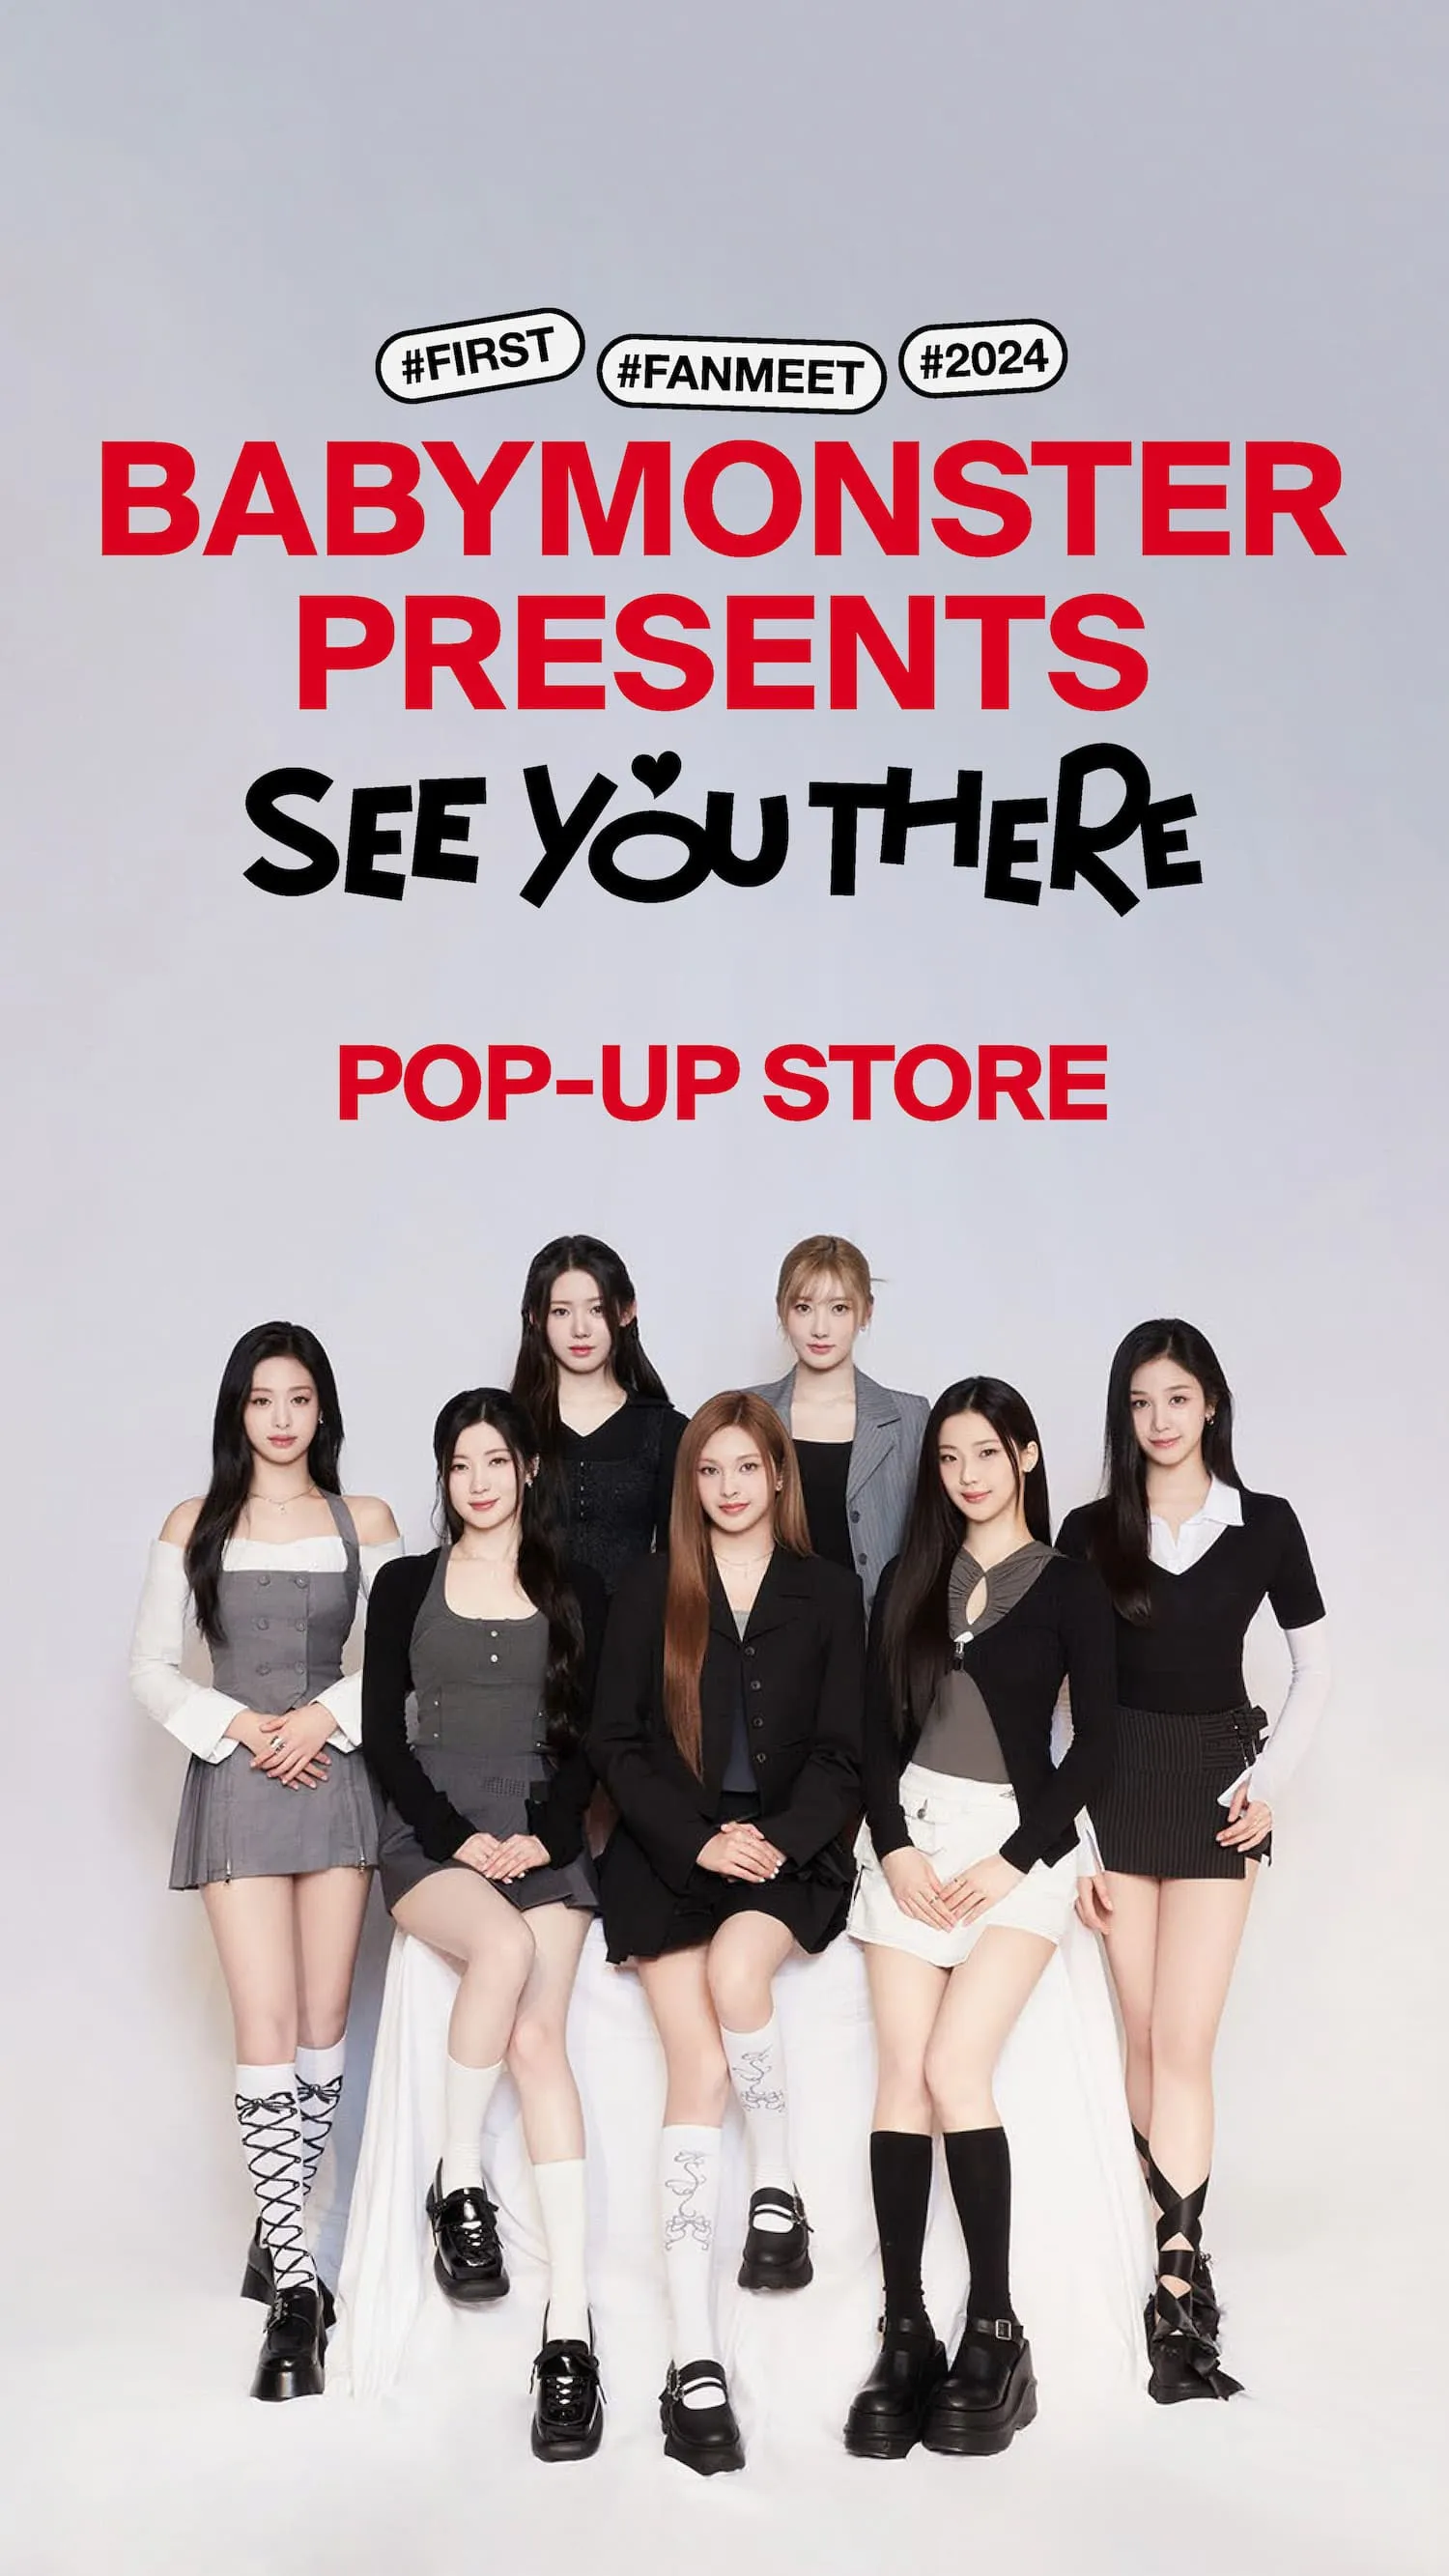 BABYMONSTER PRESENTS SEE YOU THERE POP-UP STORE IN TOKYO